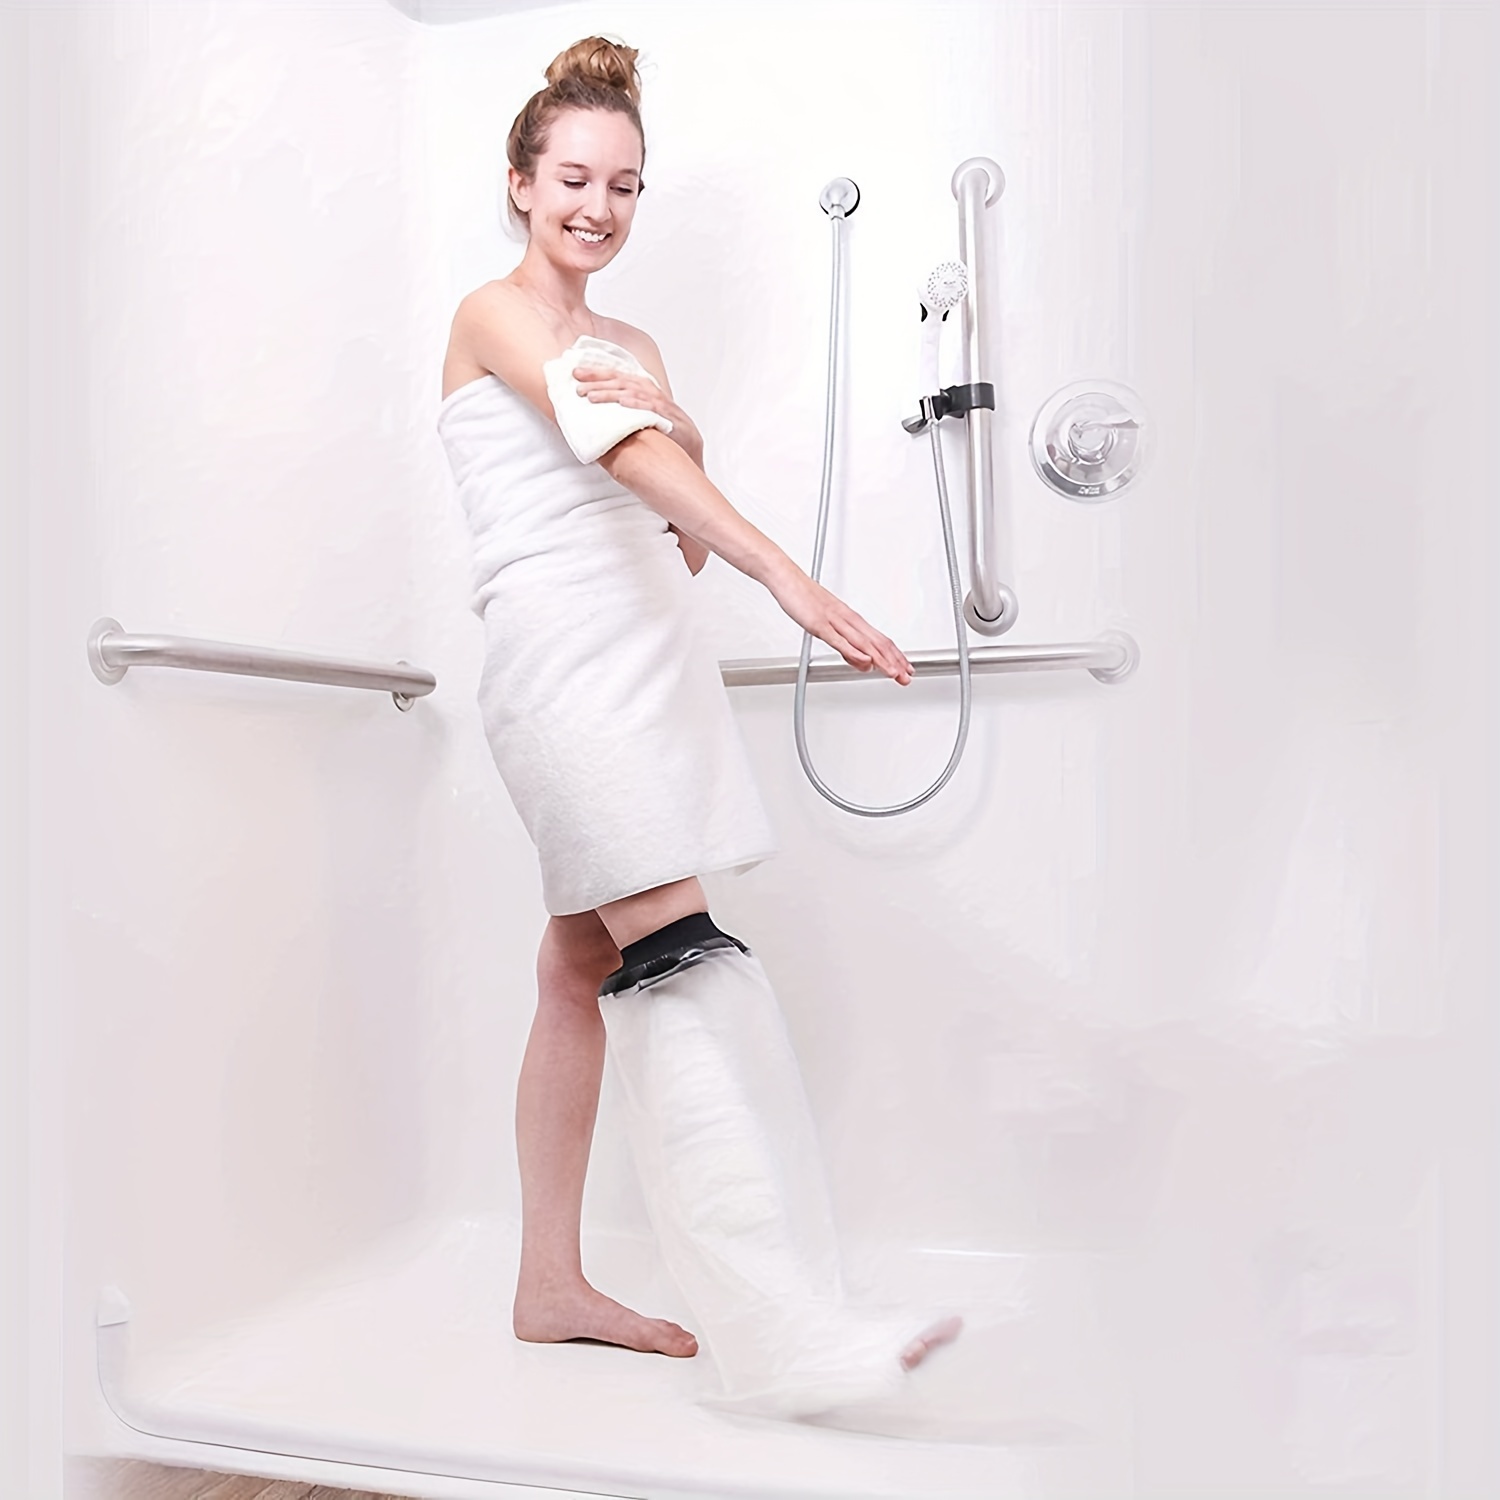  Adult leg cast protector for shower, Waterproof TPU